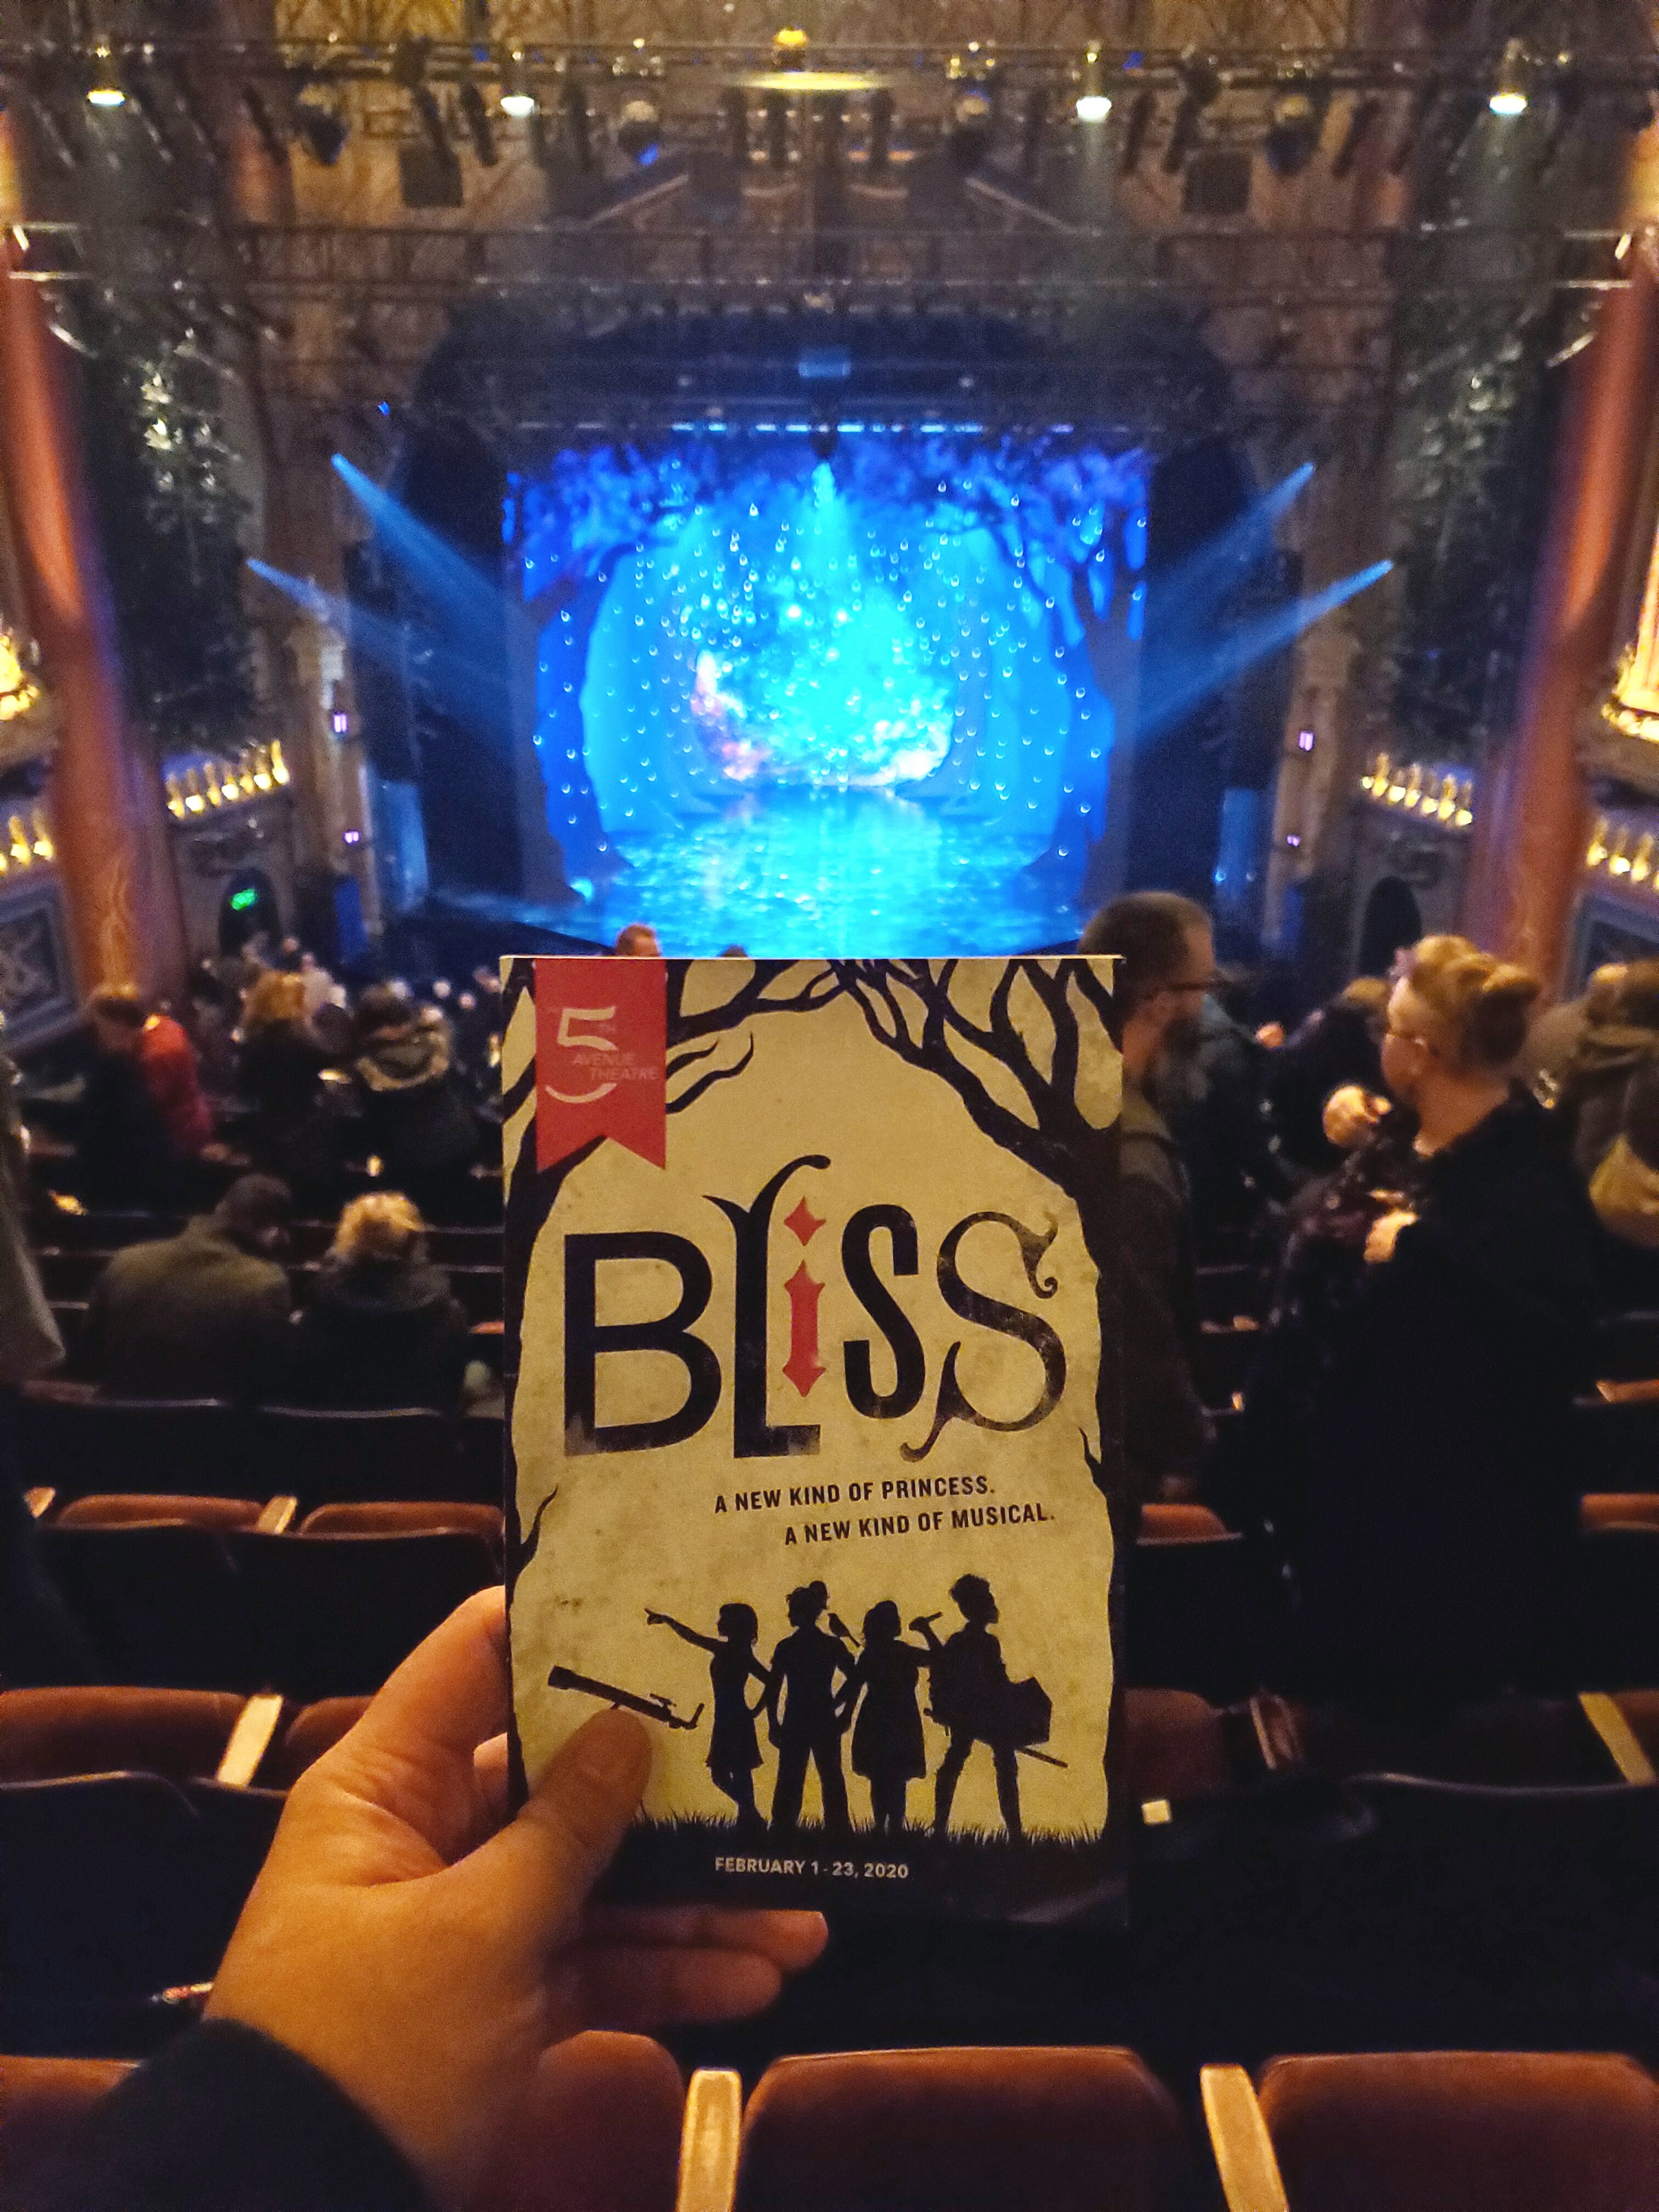 Bliss the Musical at The 5th Avenue Theatre. Novel lagoon & fairy godfather (Mario Cantone) elements. Loved the traditional perfect Stepford Cinderella-like #princesses. But the rah-rah #girlPower #sisterhood #snowflake message was overplayed 🙄. Also wish the hilarious butch lesbian #princess was featured more.